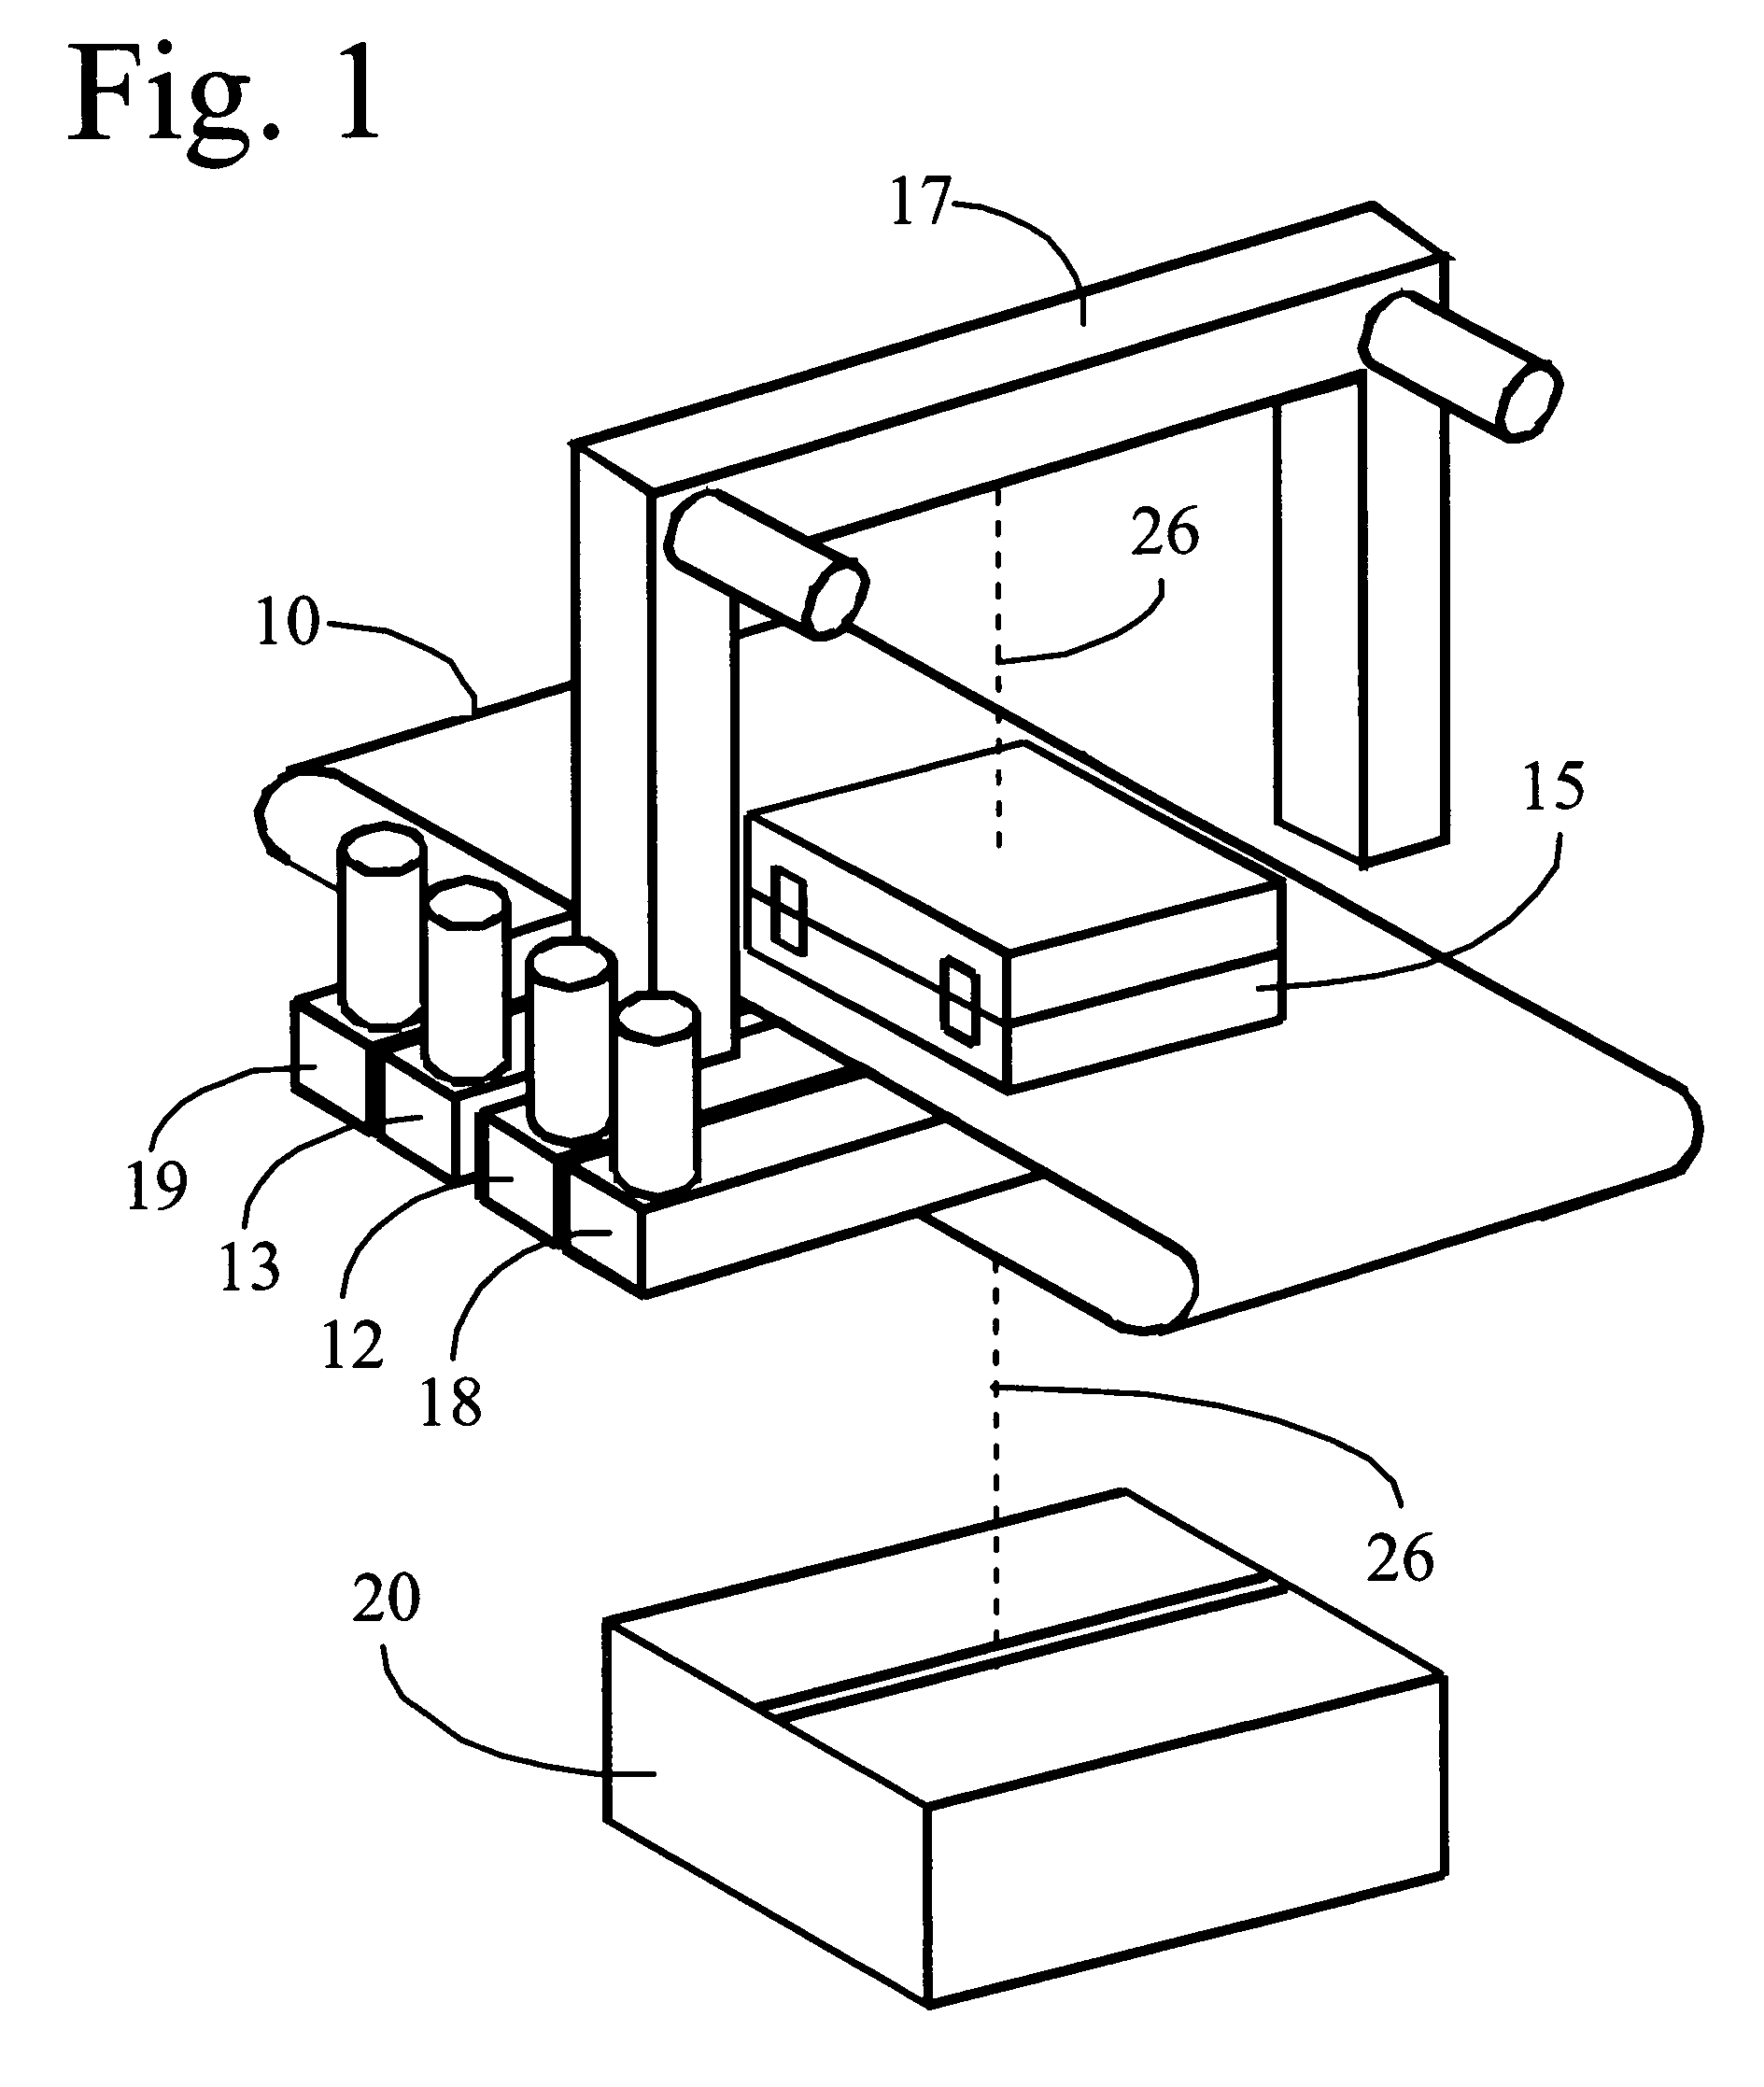 Tomographic scanning X-ray inspection system using transmitted and Compton scattered radiation